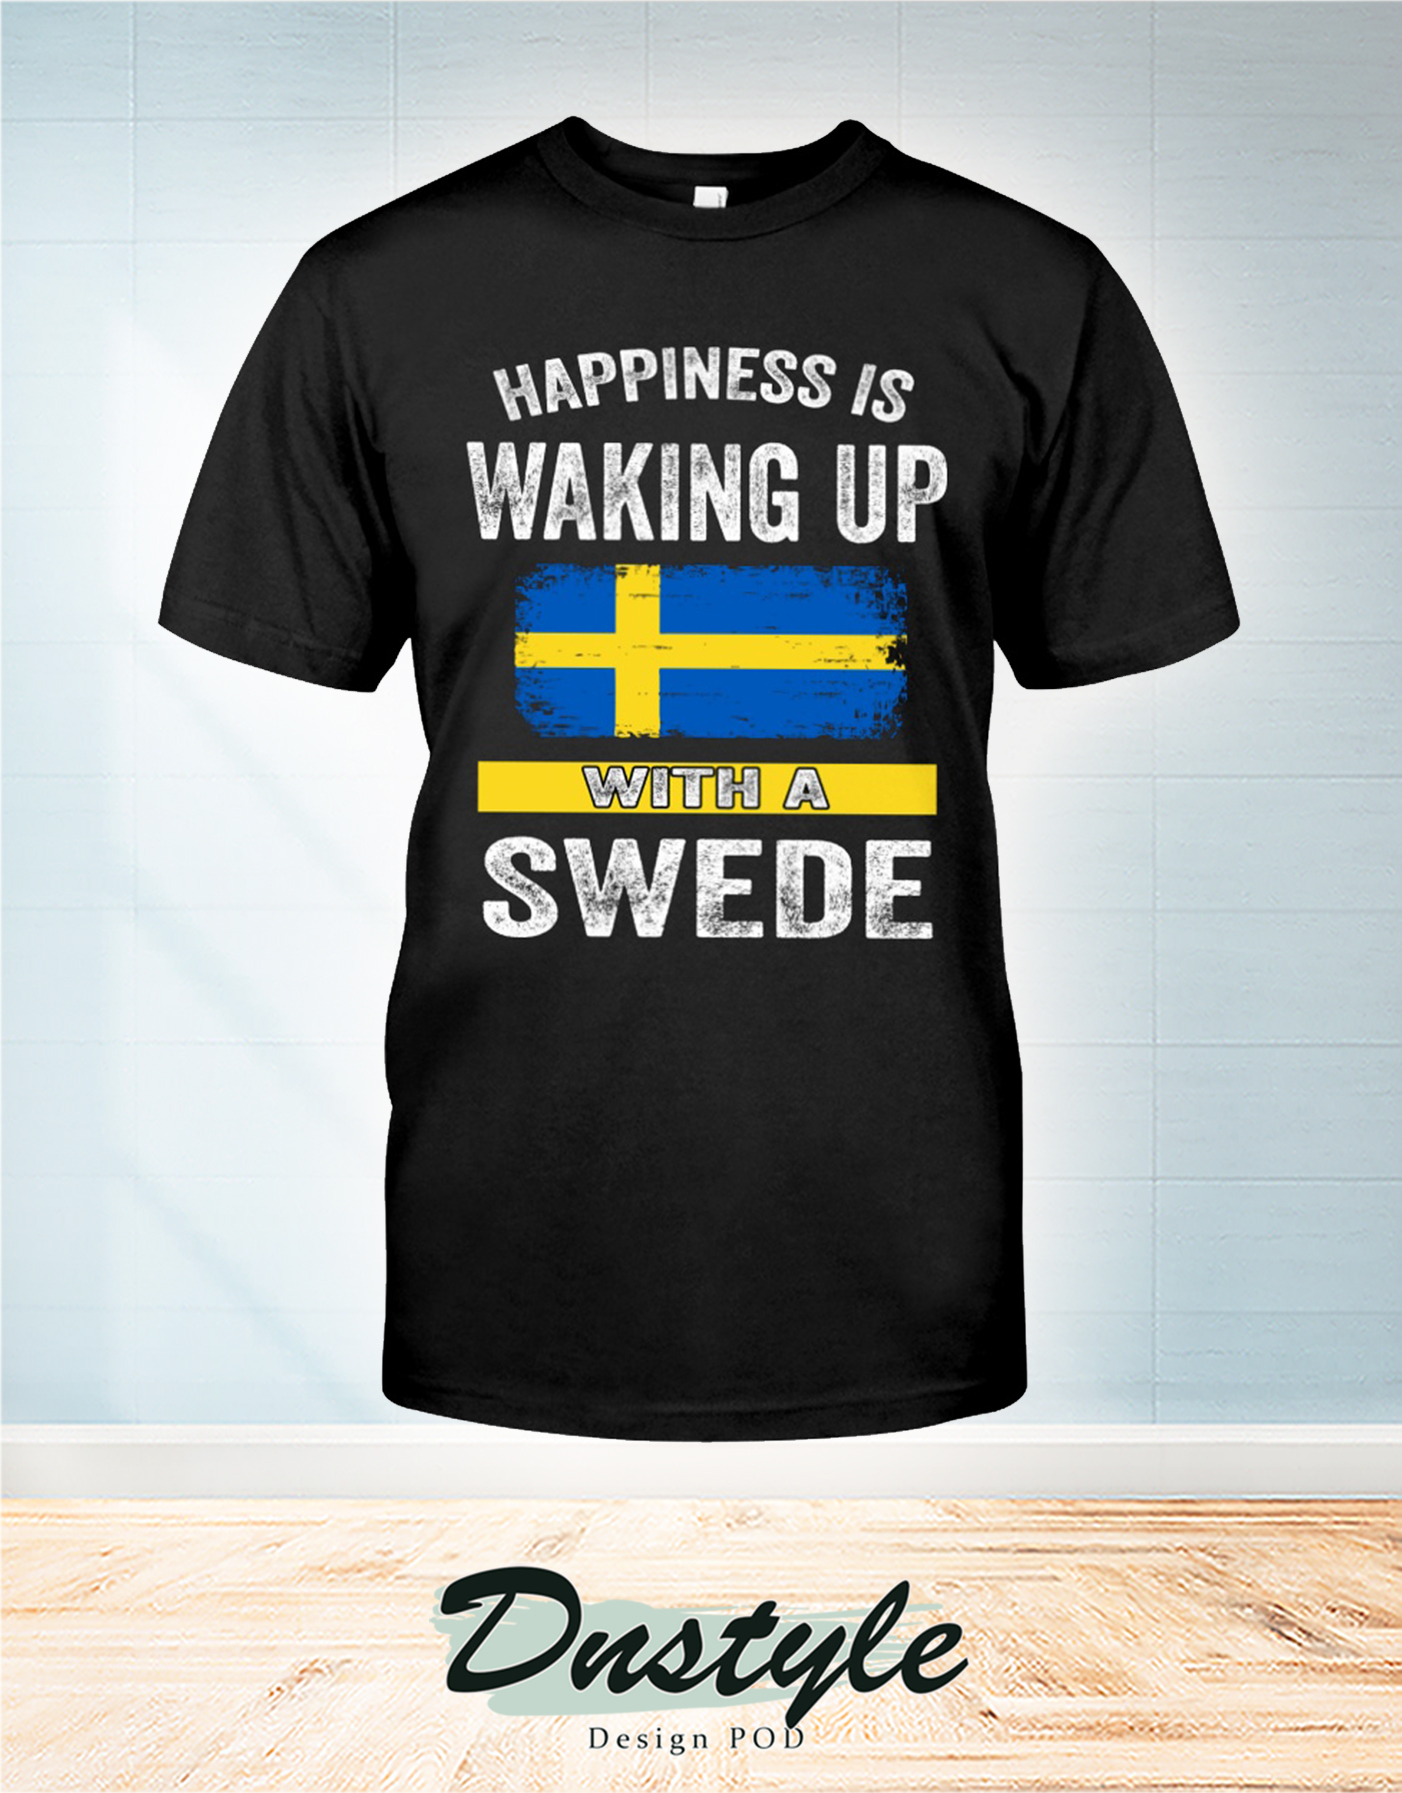 Happiness is waking up with a swede t-shirt